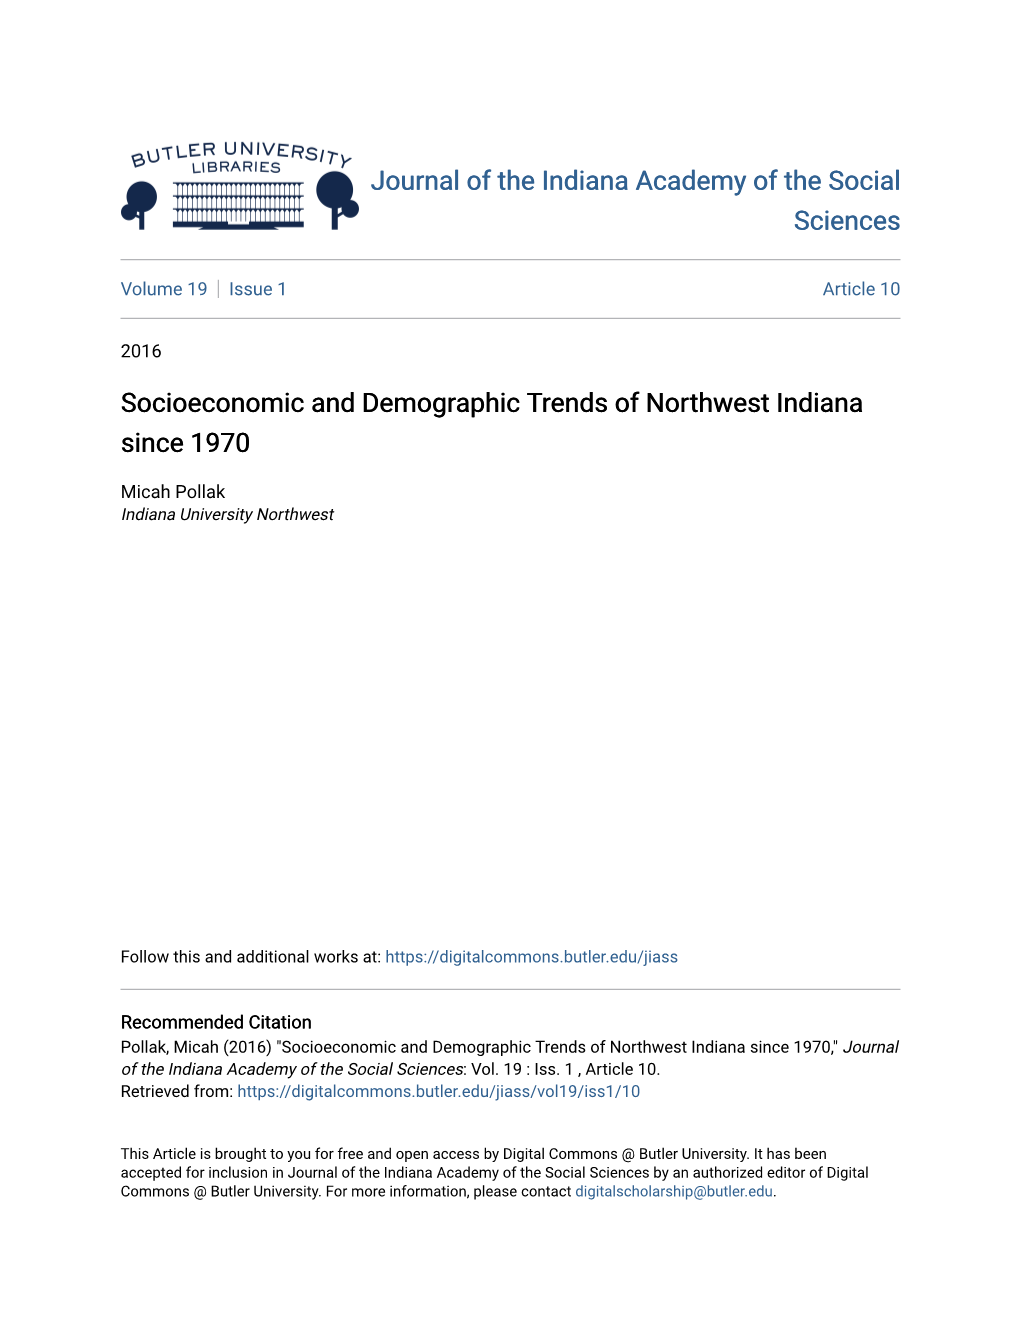 Socioeconomic and Demographic Trends of Northwest Indiana Since 1970